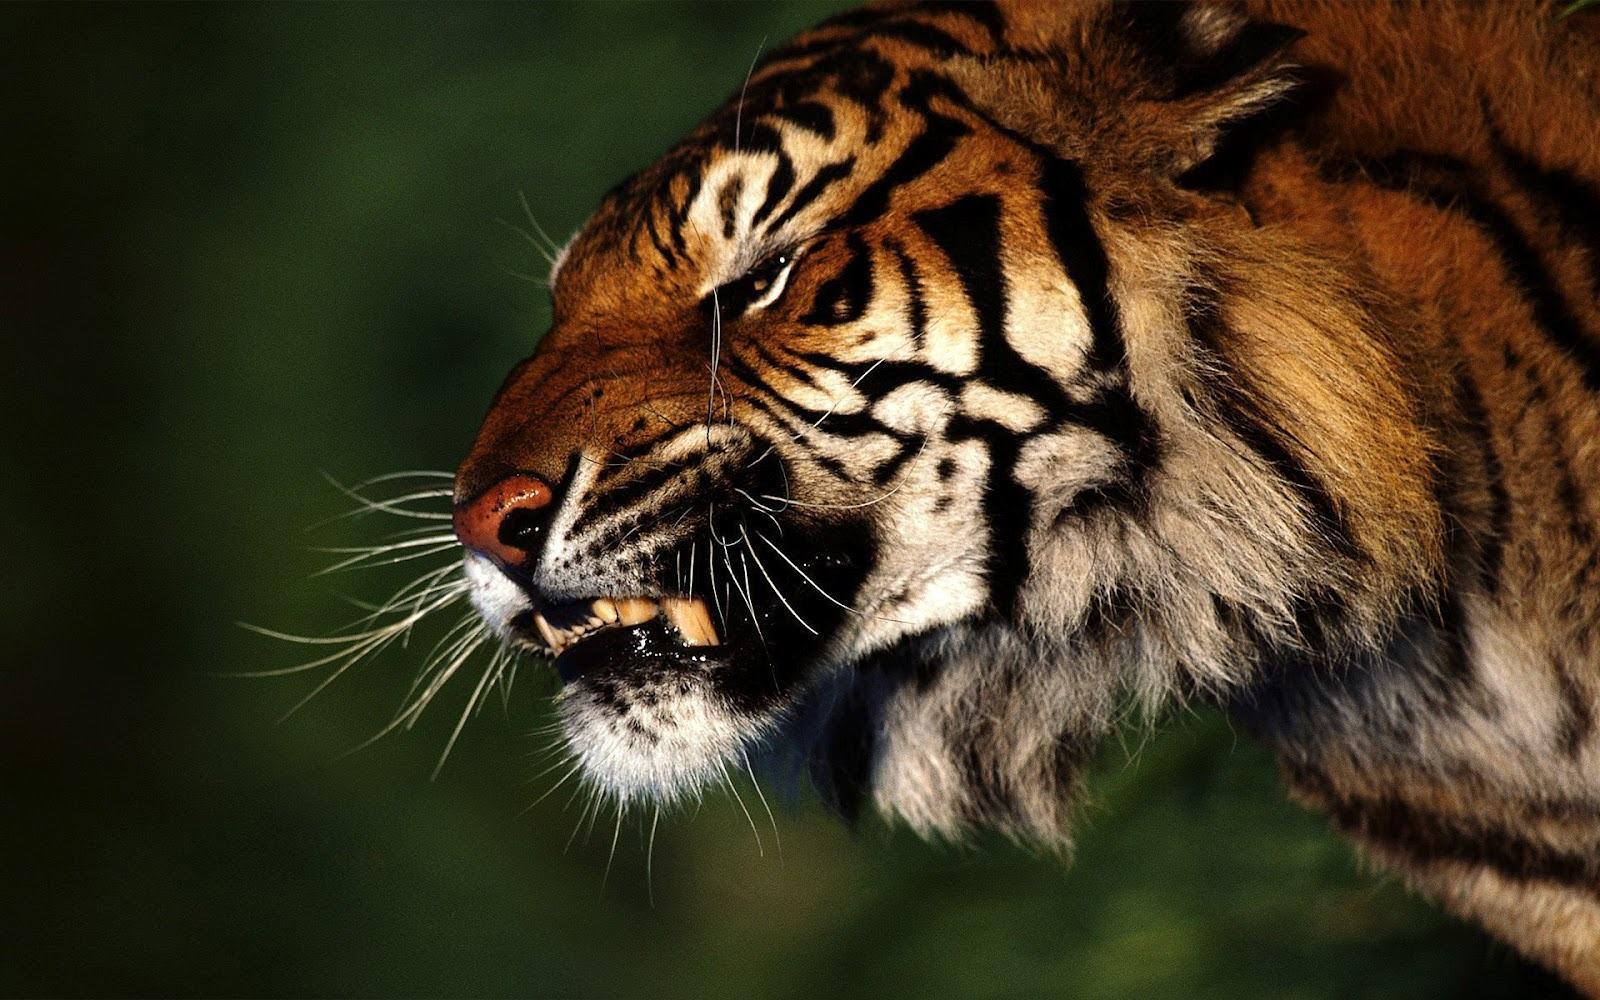 Angry rough tiger jungle awesome 2012 download wallpaper HD Wall